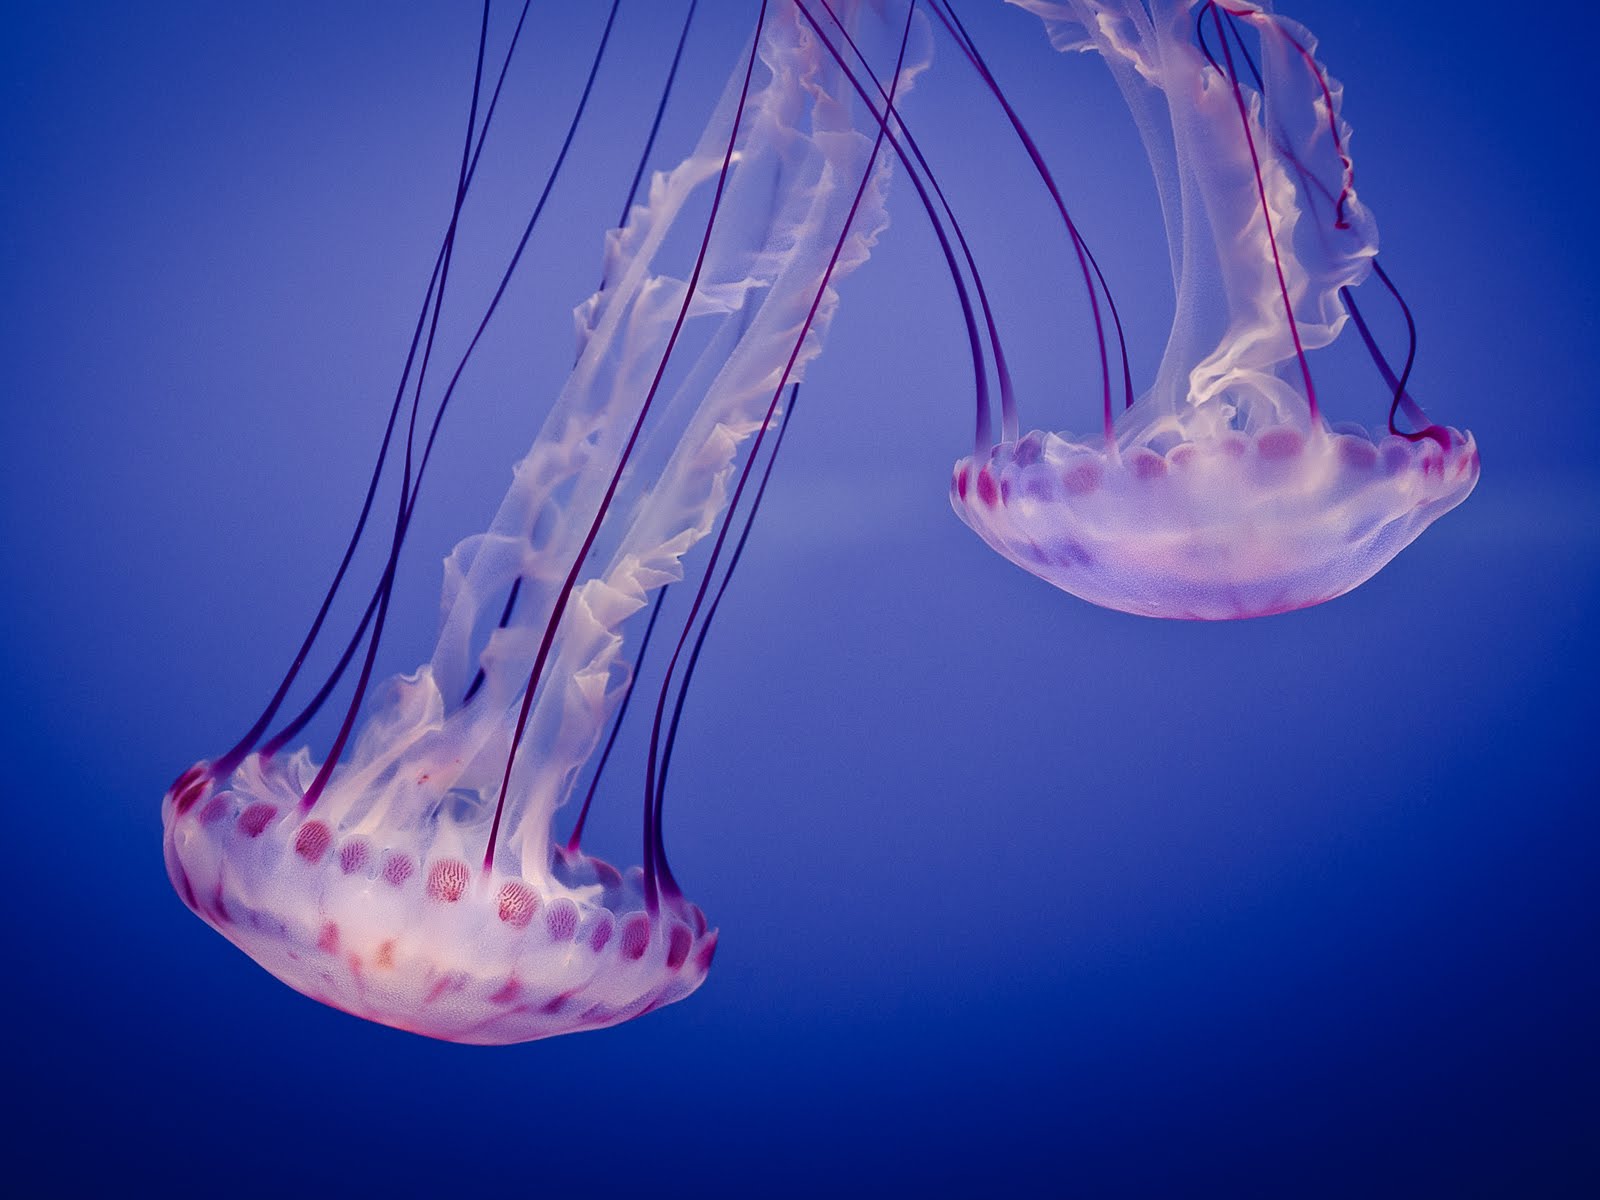 jellyfish backgrounds for powerpoint template